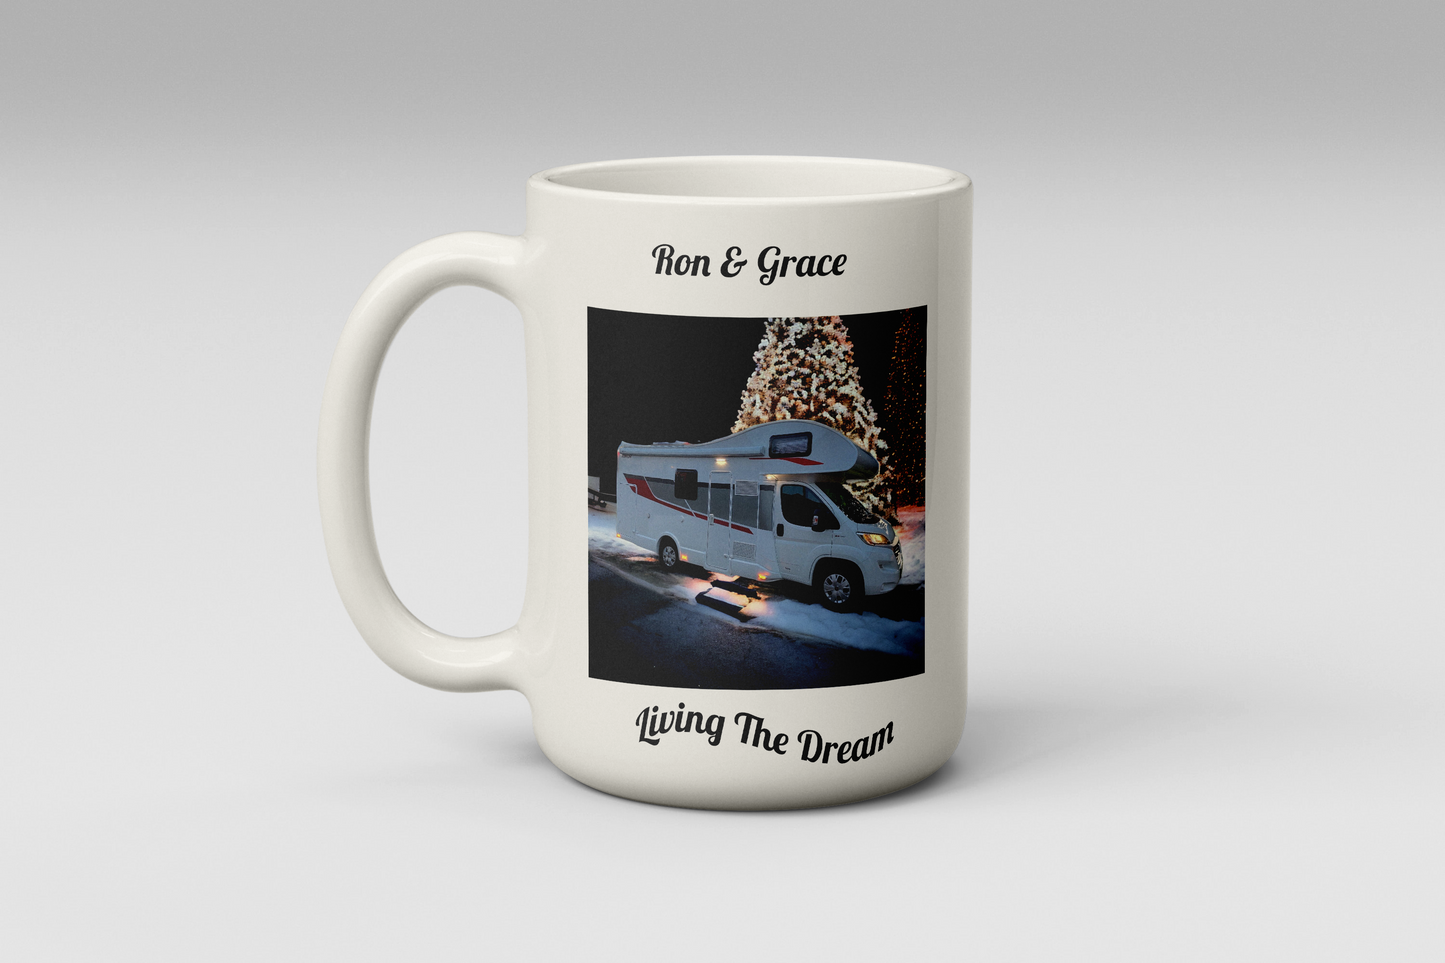  Personalised Picture of Your Camper Mug by Free Spirit Accessories sold by Free Spirit Accessories